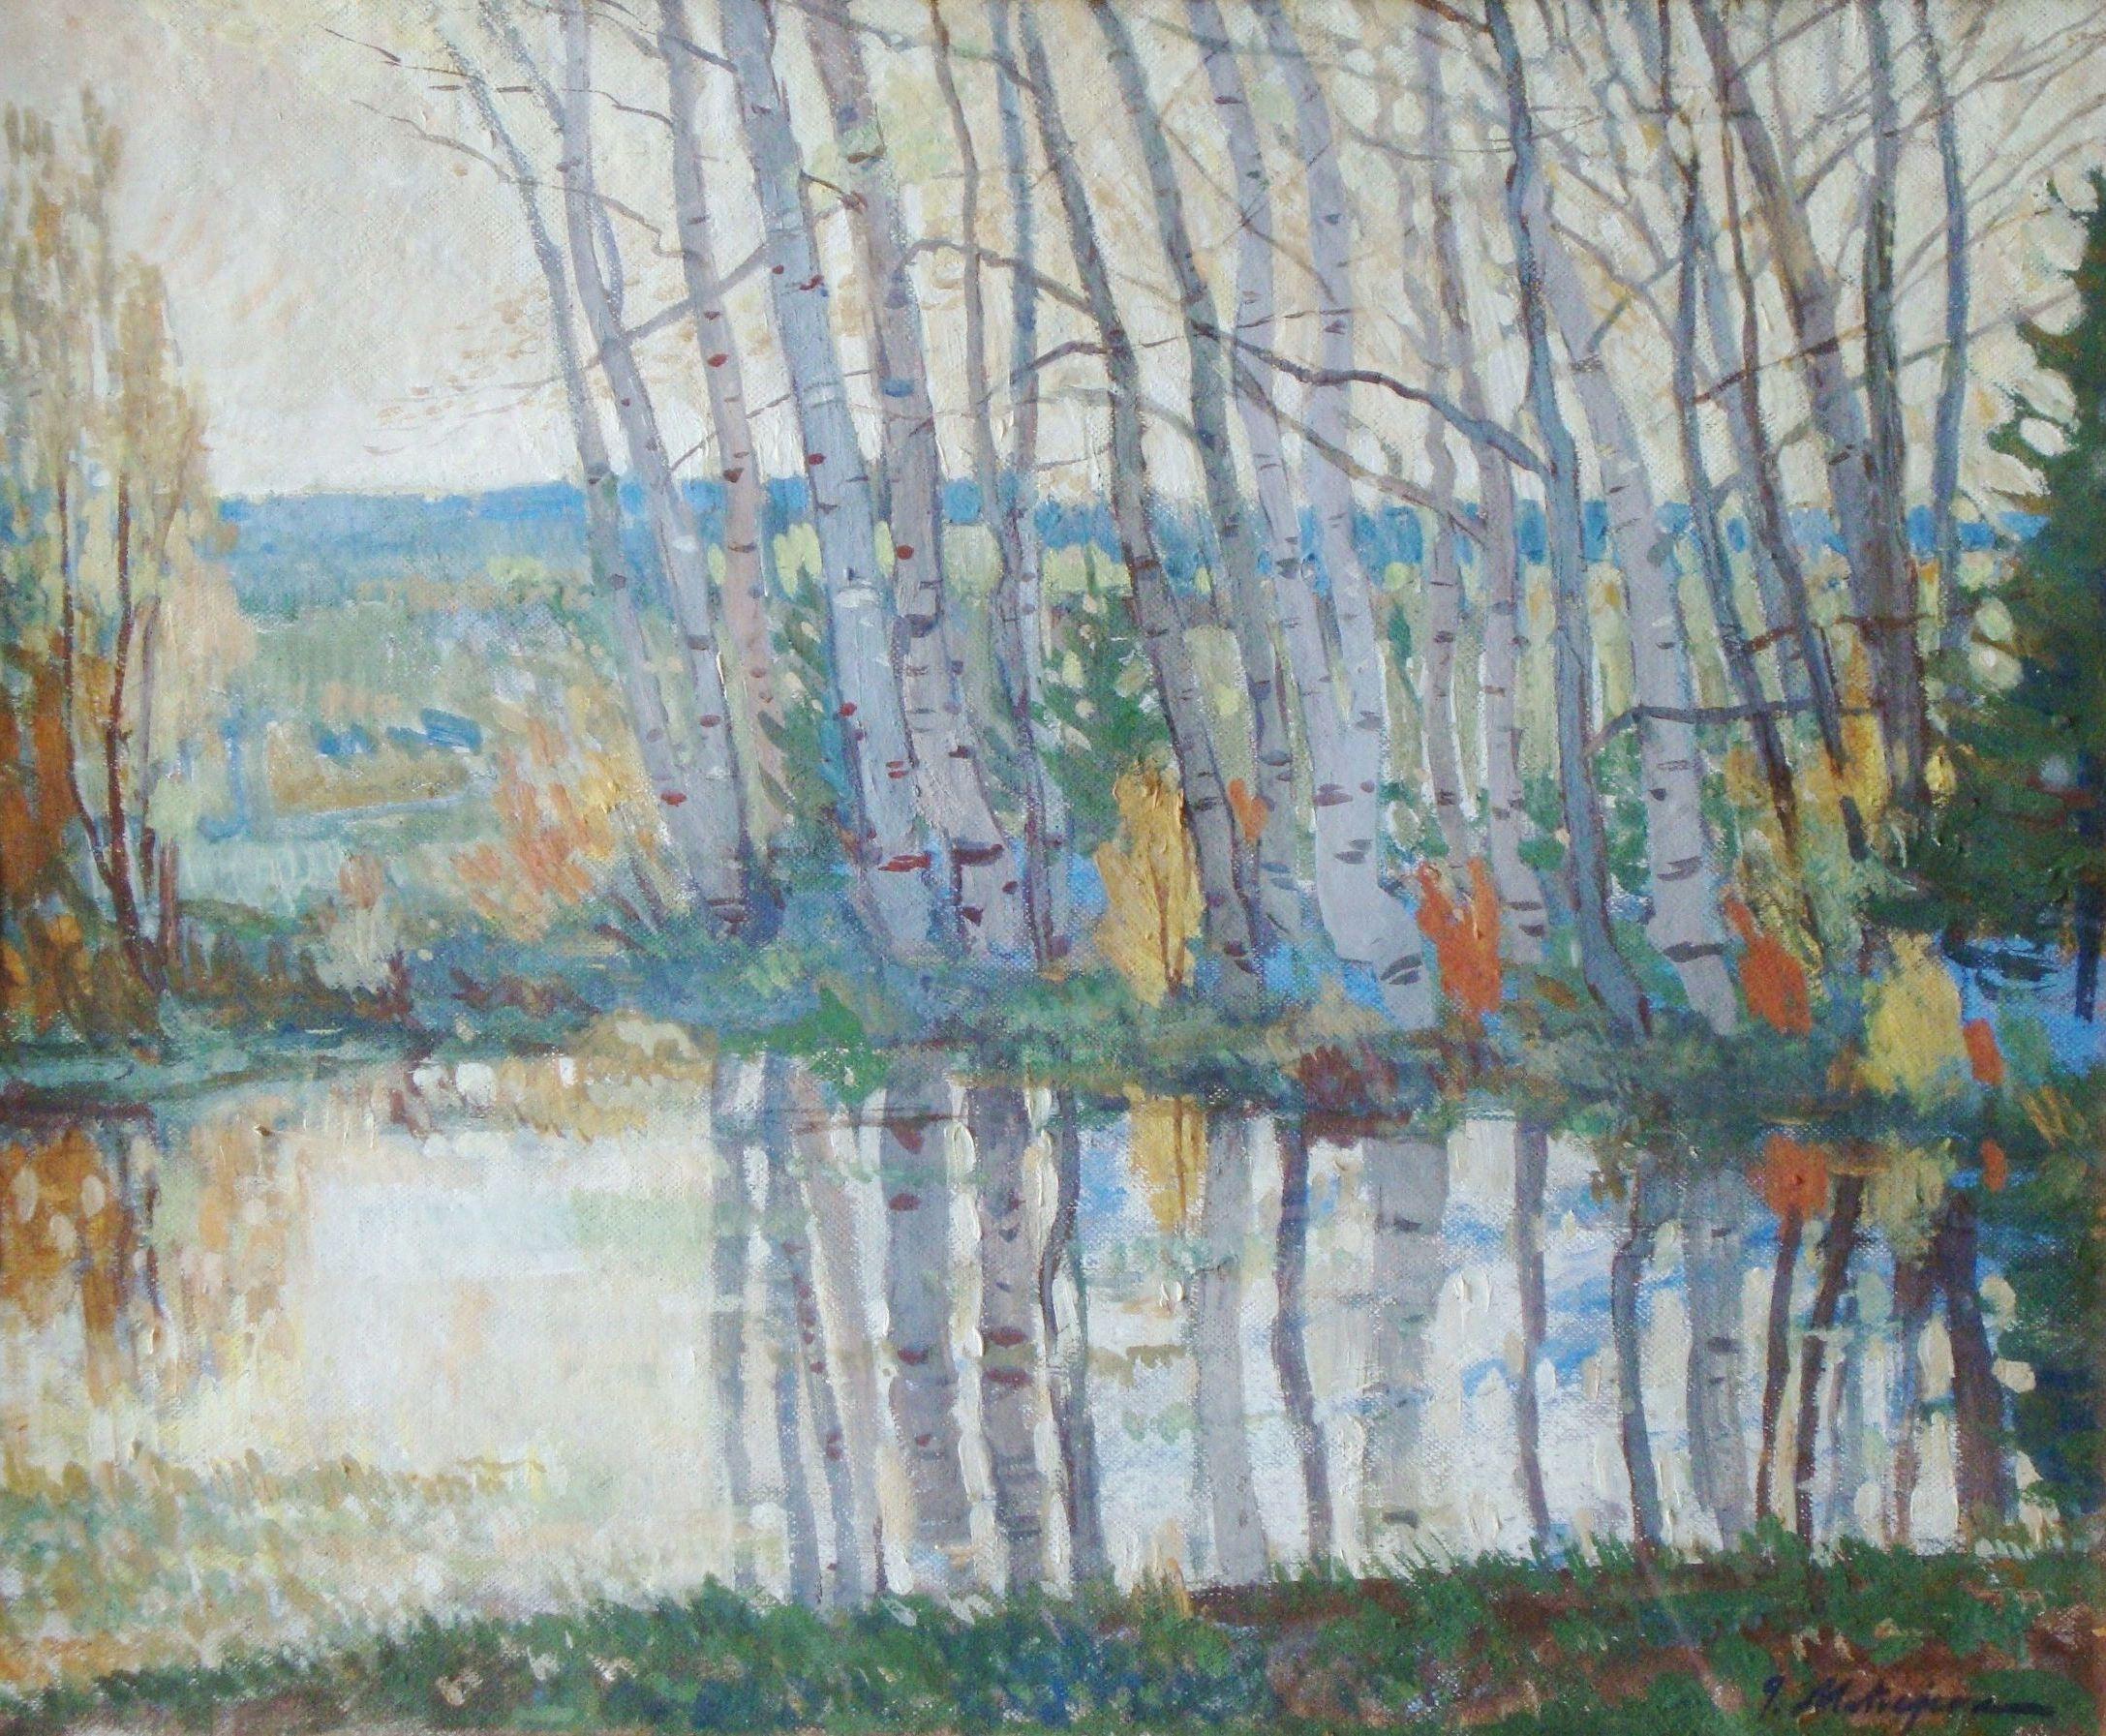 Landscape with birches. 1960s. Oil on canvas, 52x62 cm